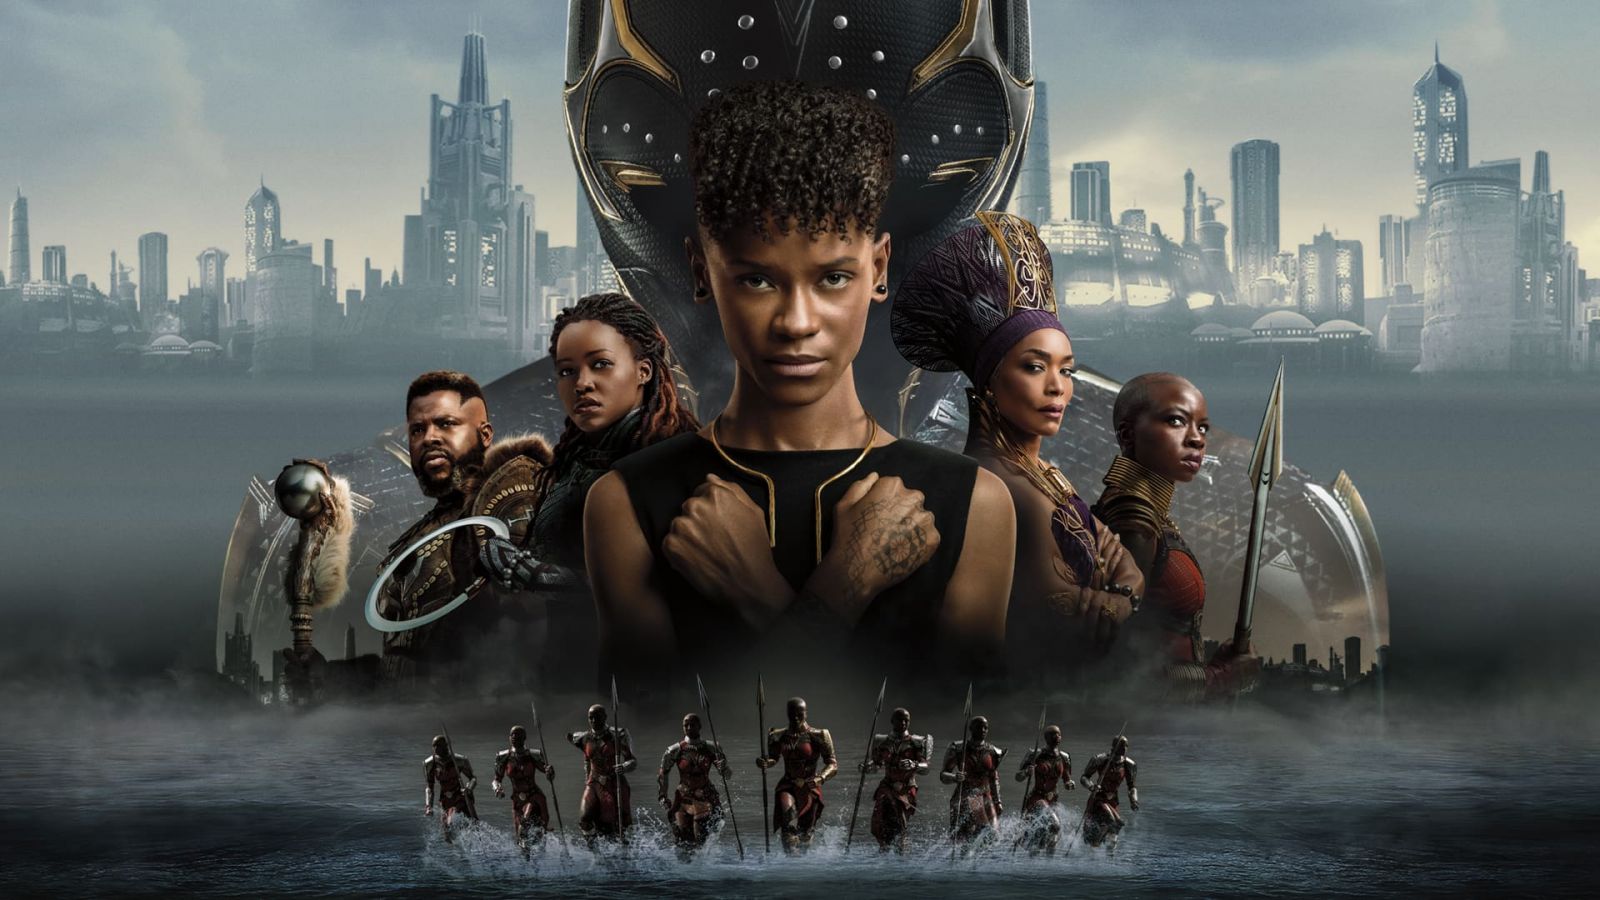 Black Panther Wakanda Forever 2022, Watch Movie Black Panther Wakanda Forever 2022 Full HD, Black Panther Wakanda Forever 2022 Full Free Online, Watch Black Panther Wakanda Forever 2022 Full, Full Movie Black Panther Wakanda Forever 2022 Free Online, Black Panther Wakanda Forever 2022 Full HD 1080P, Watch Online Black Panther Wakanda Forever 2022 Free, Black Panther Wakanda Forever 2022 Youtube, Watch Black Panther Wakanda Forever 2022 On Youtube, Marvel Movies, TV Series Ms Marvel, Watch Ms Marvel Free Online